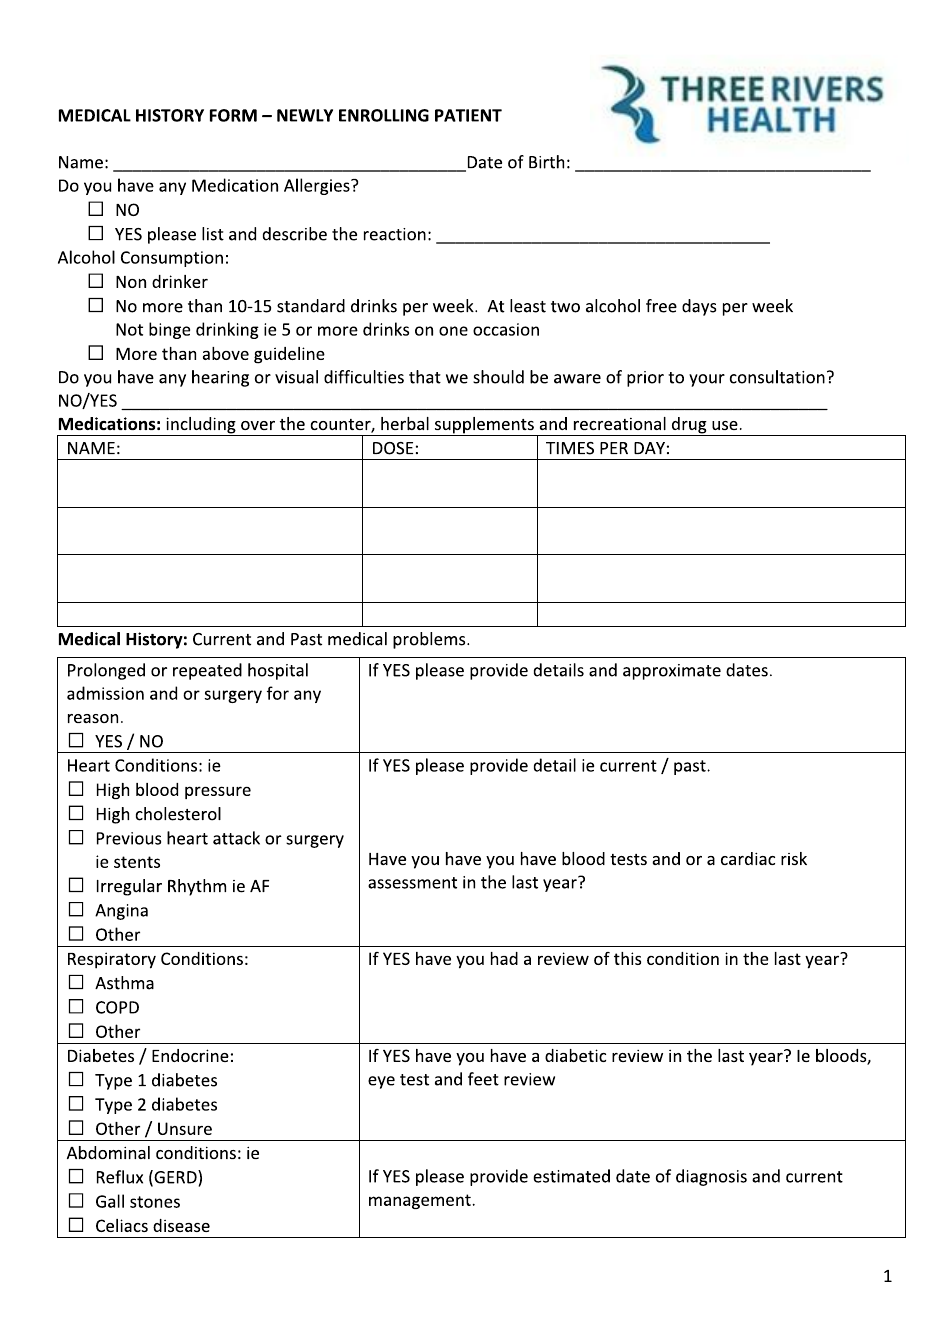 Medical History Form (Newly Enrolling Patient) - Three Rivers Health, Page 1